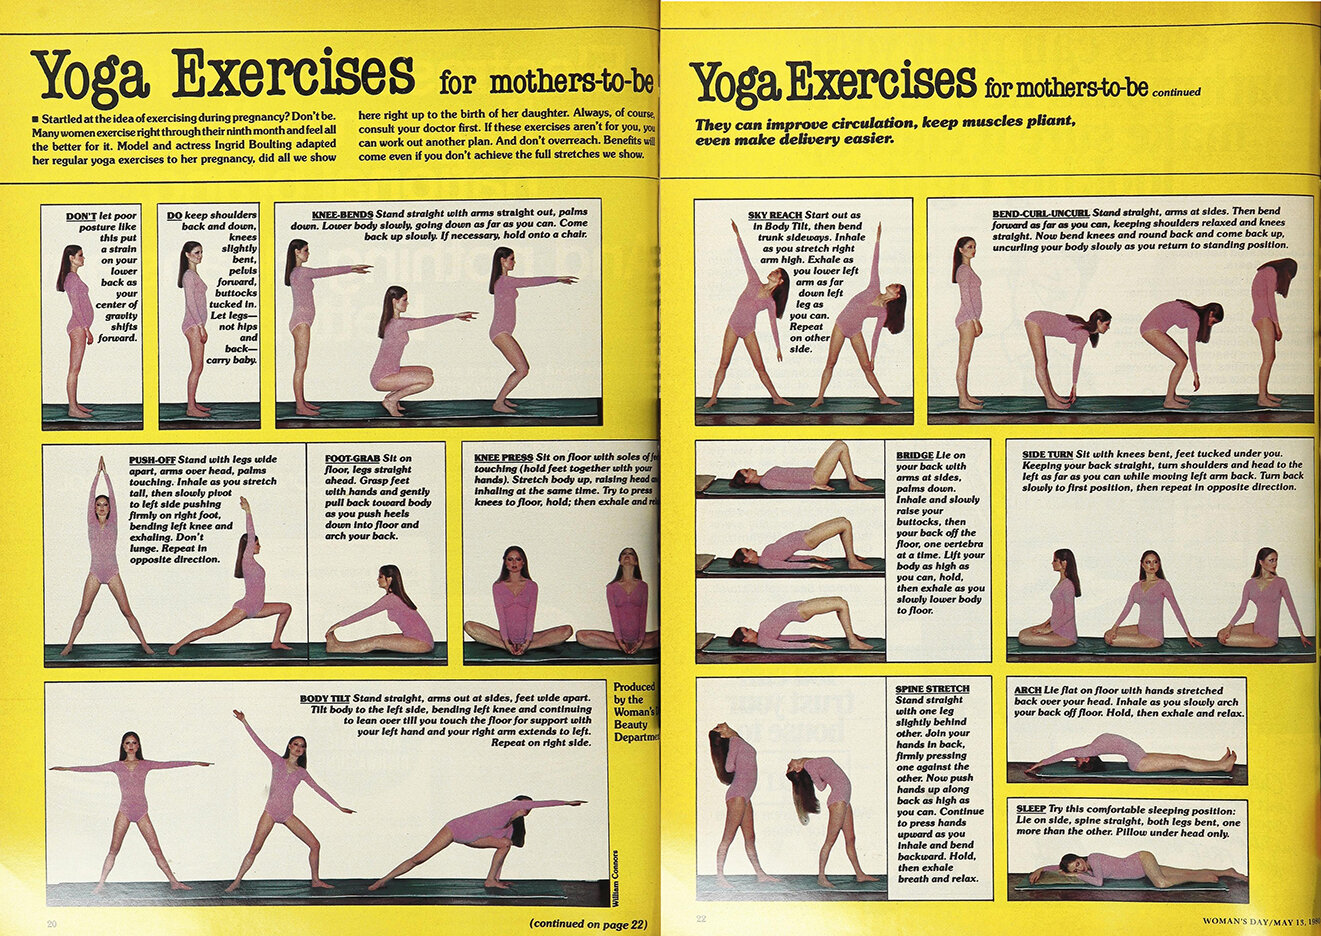 Ingrid's pre-natal yoga routine in Women's Day, May 13th, 1980.